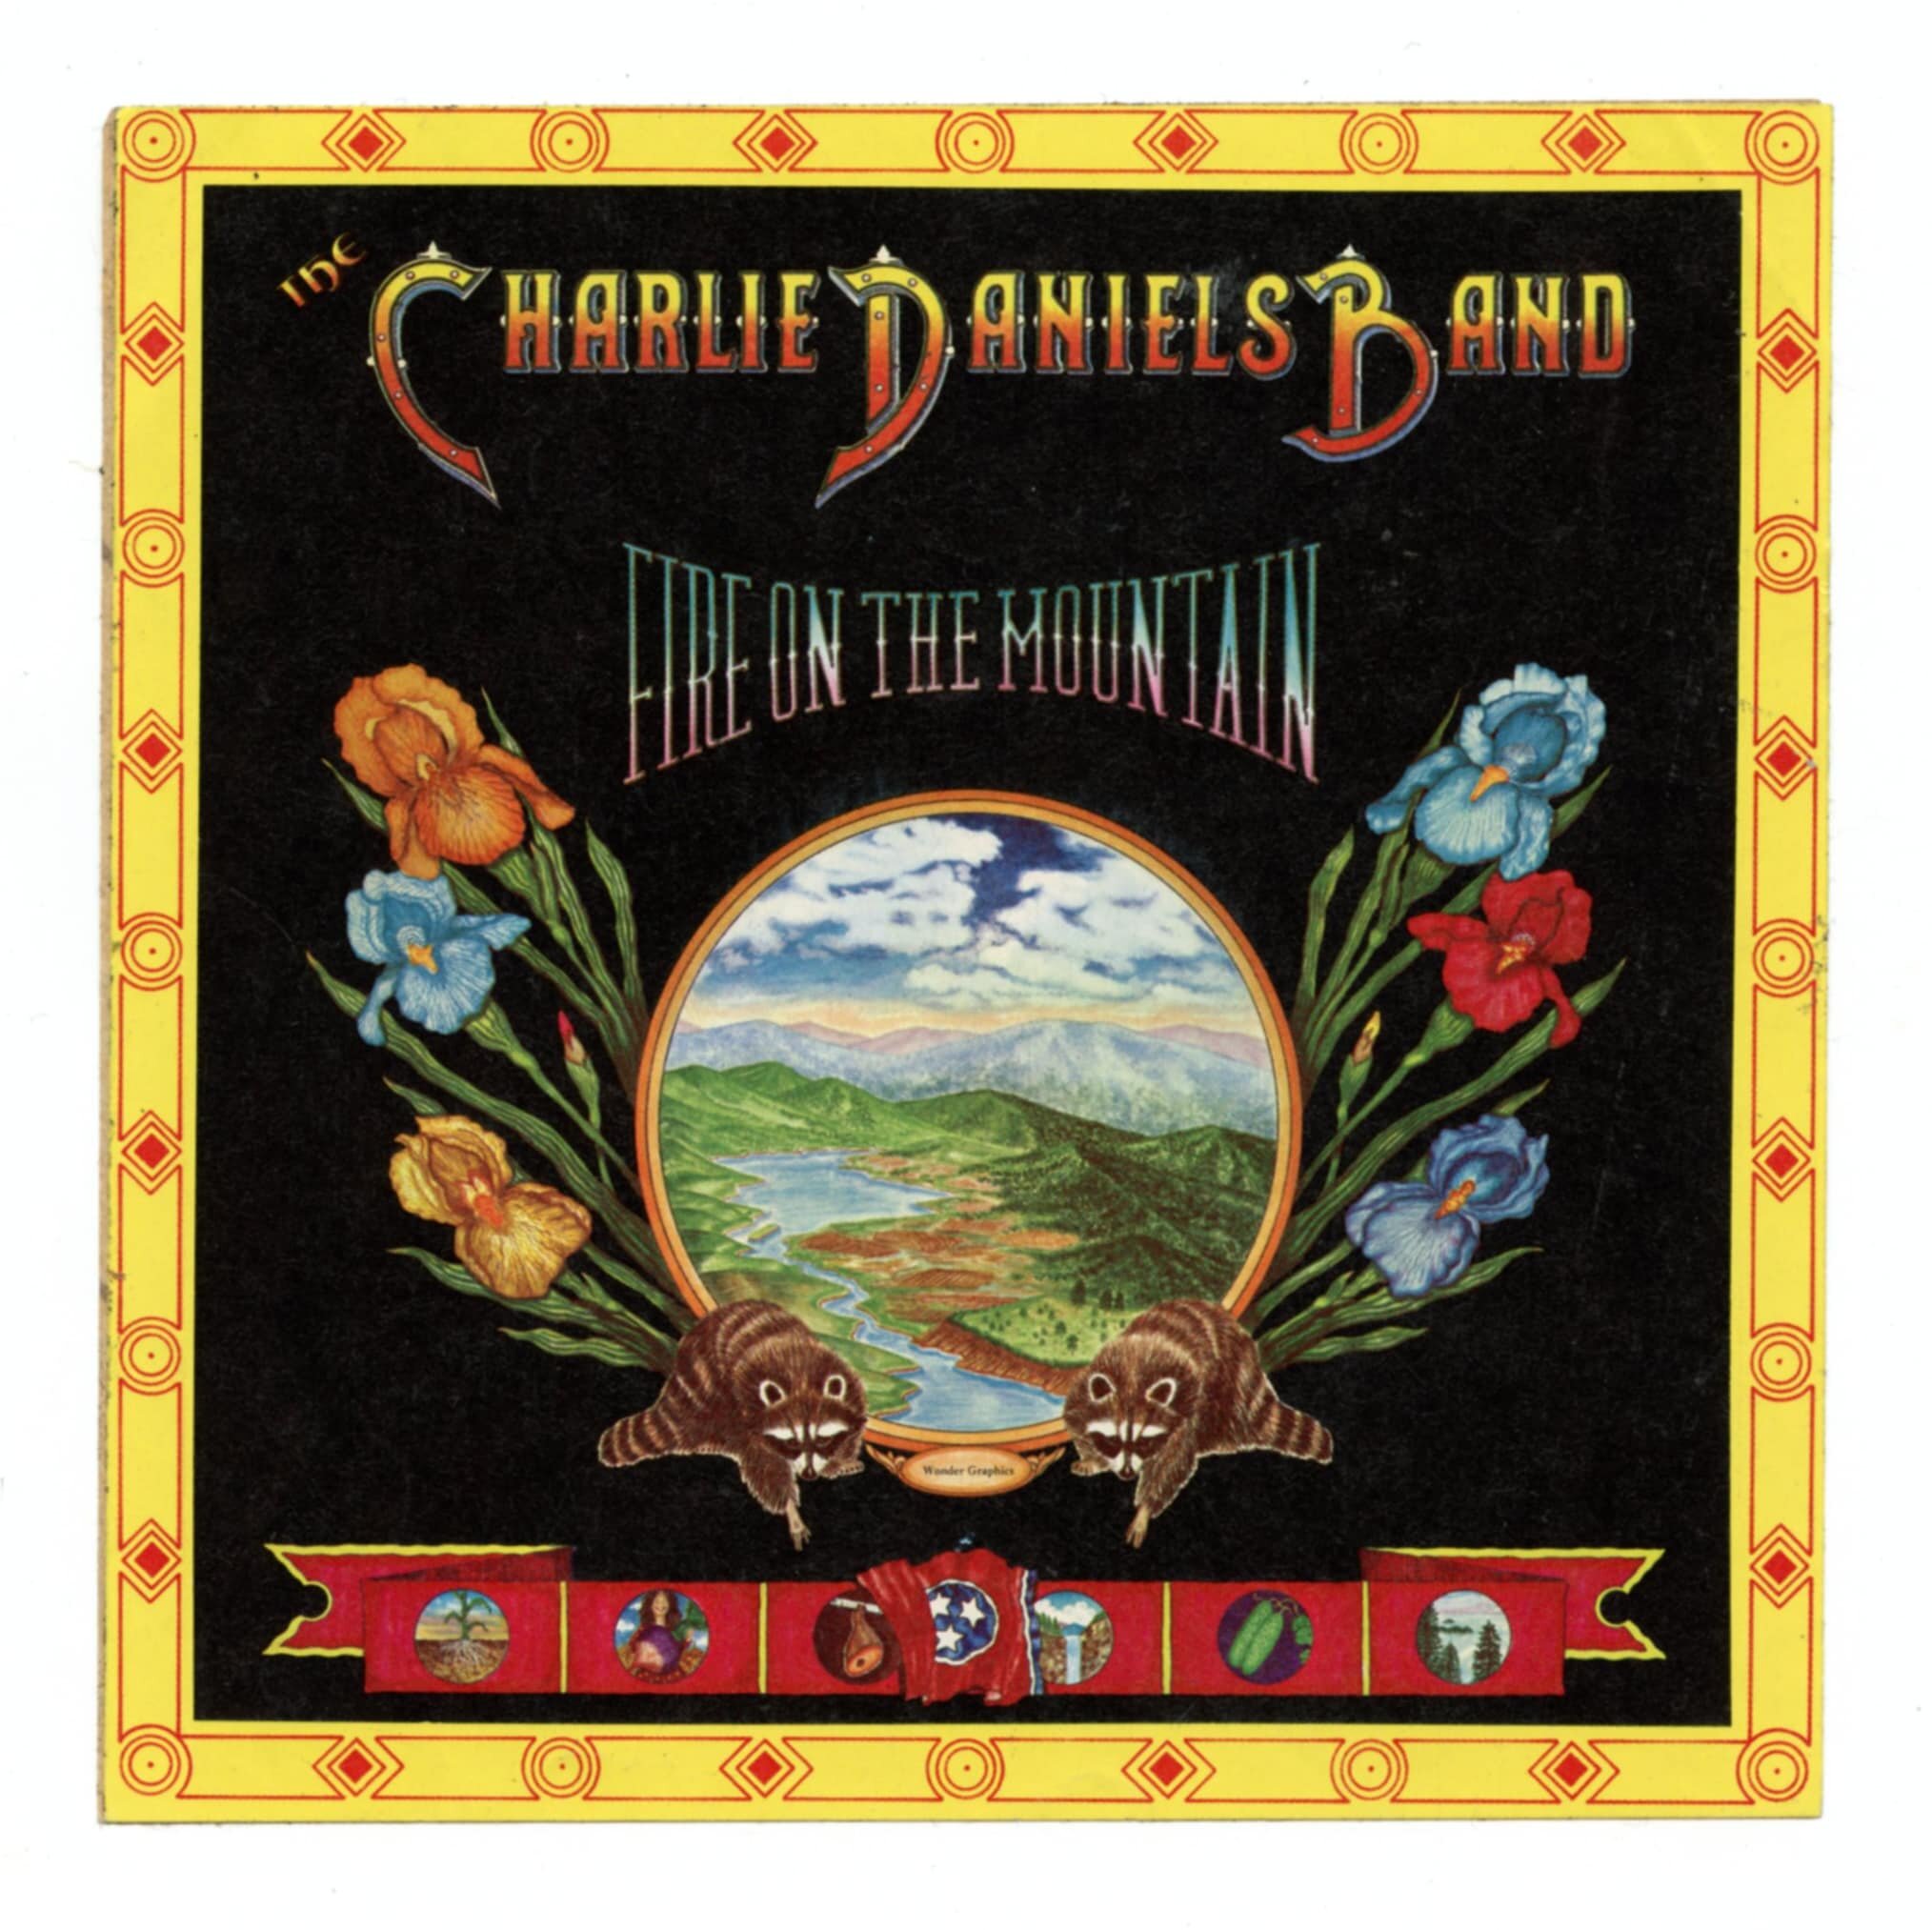 The Charlie Daniels Band Sticker 1974 Fire On The Mountain Album Promo